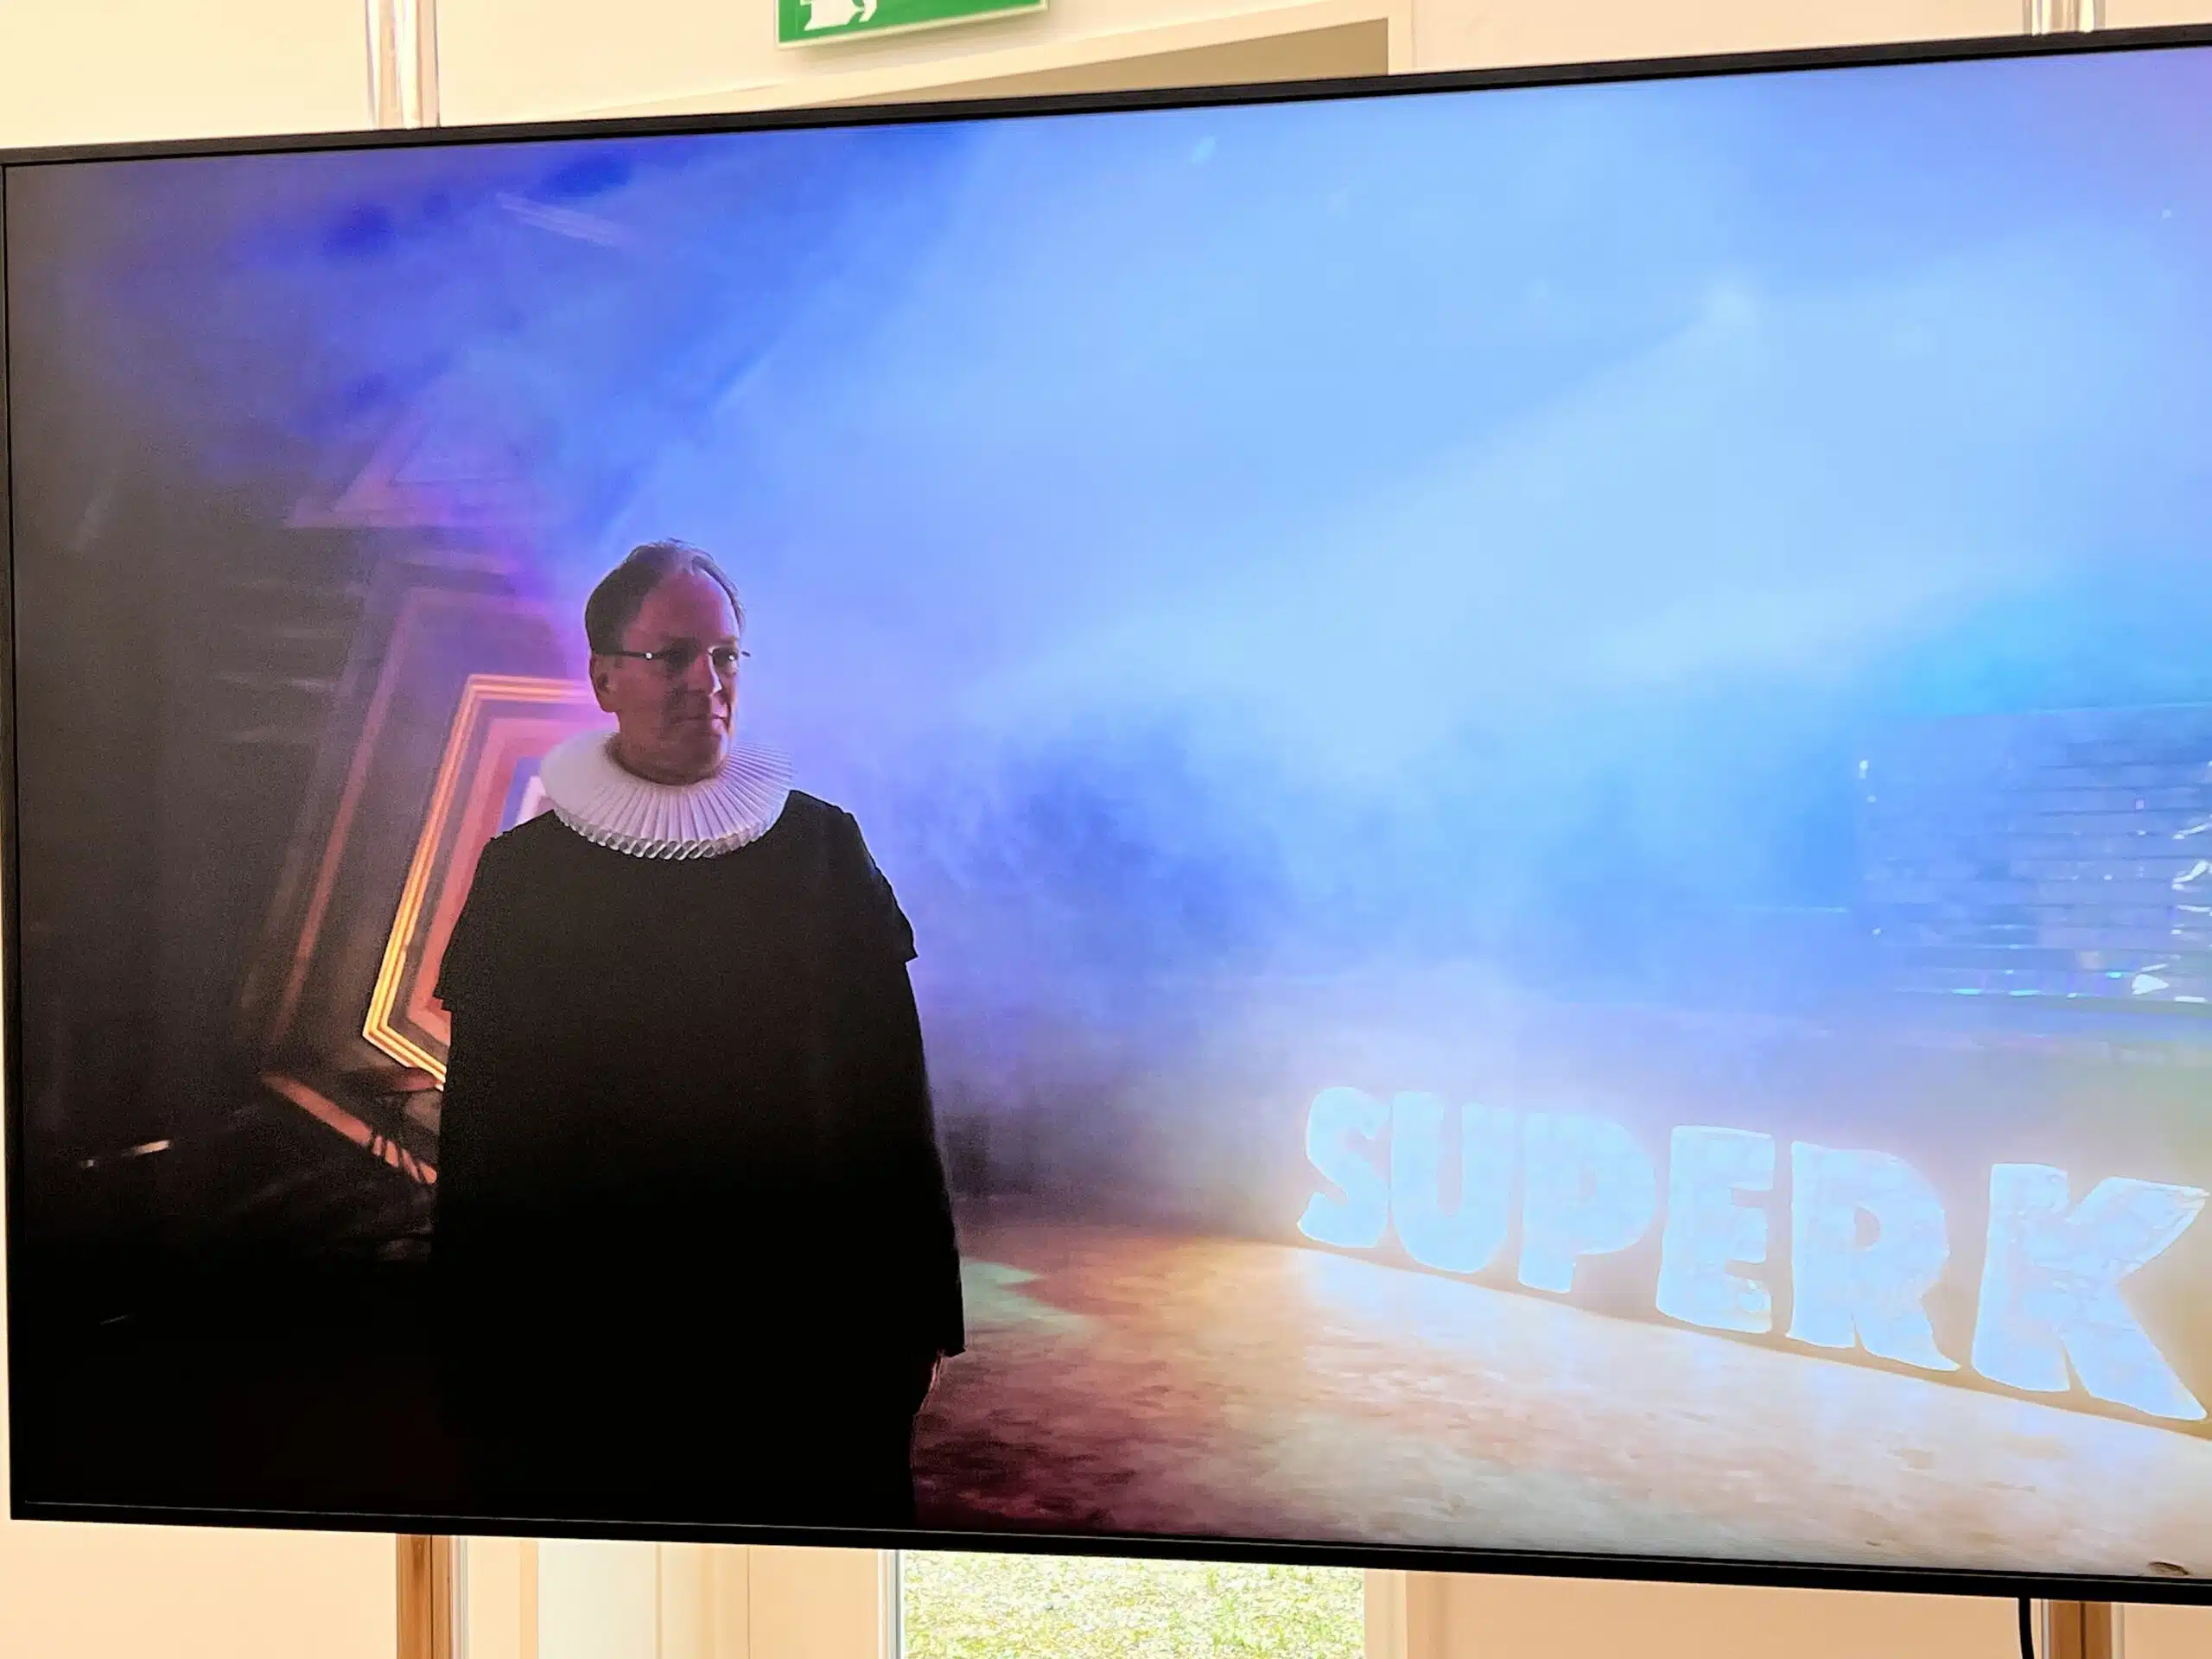 The new video installation by action artist Christian Jankowski - Sacred Business in Lübeck